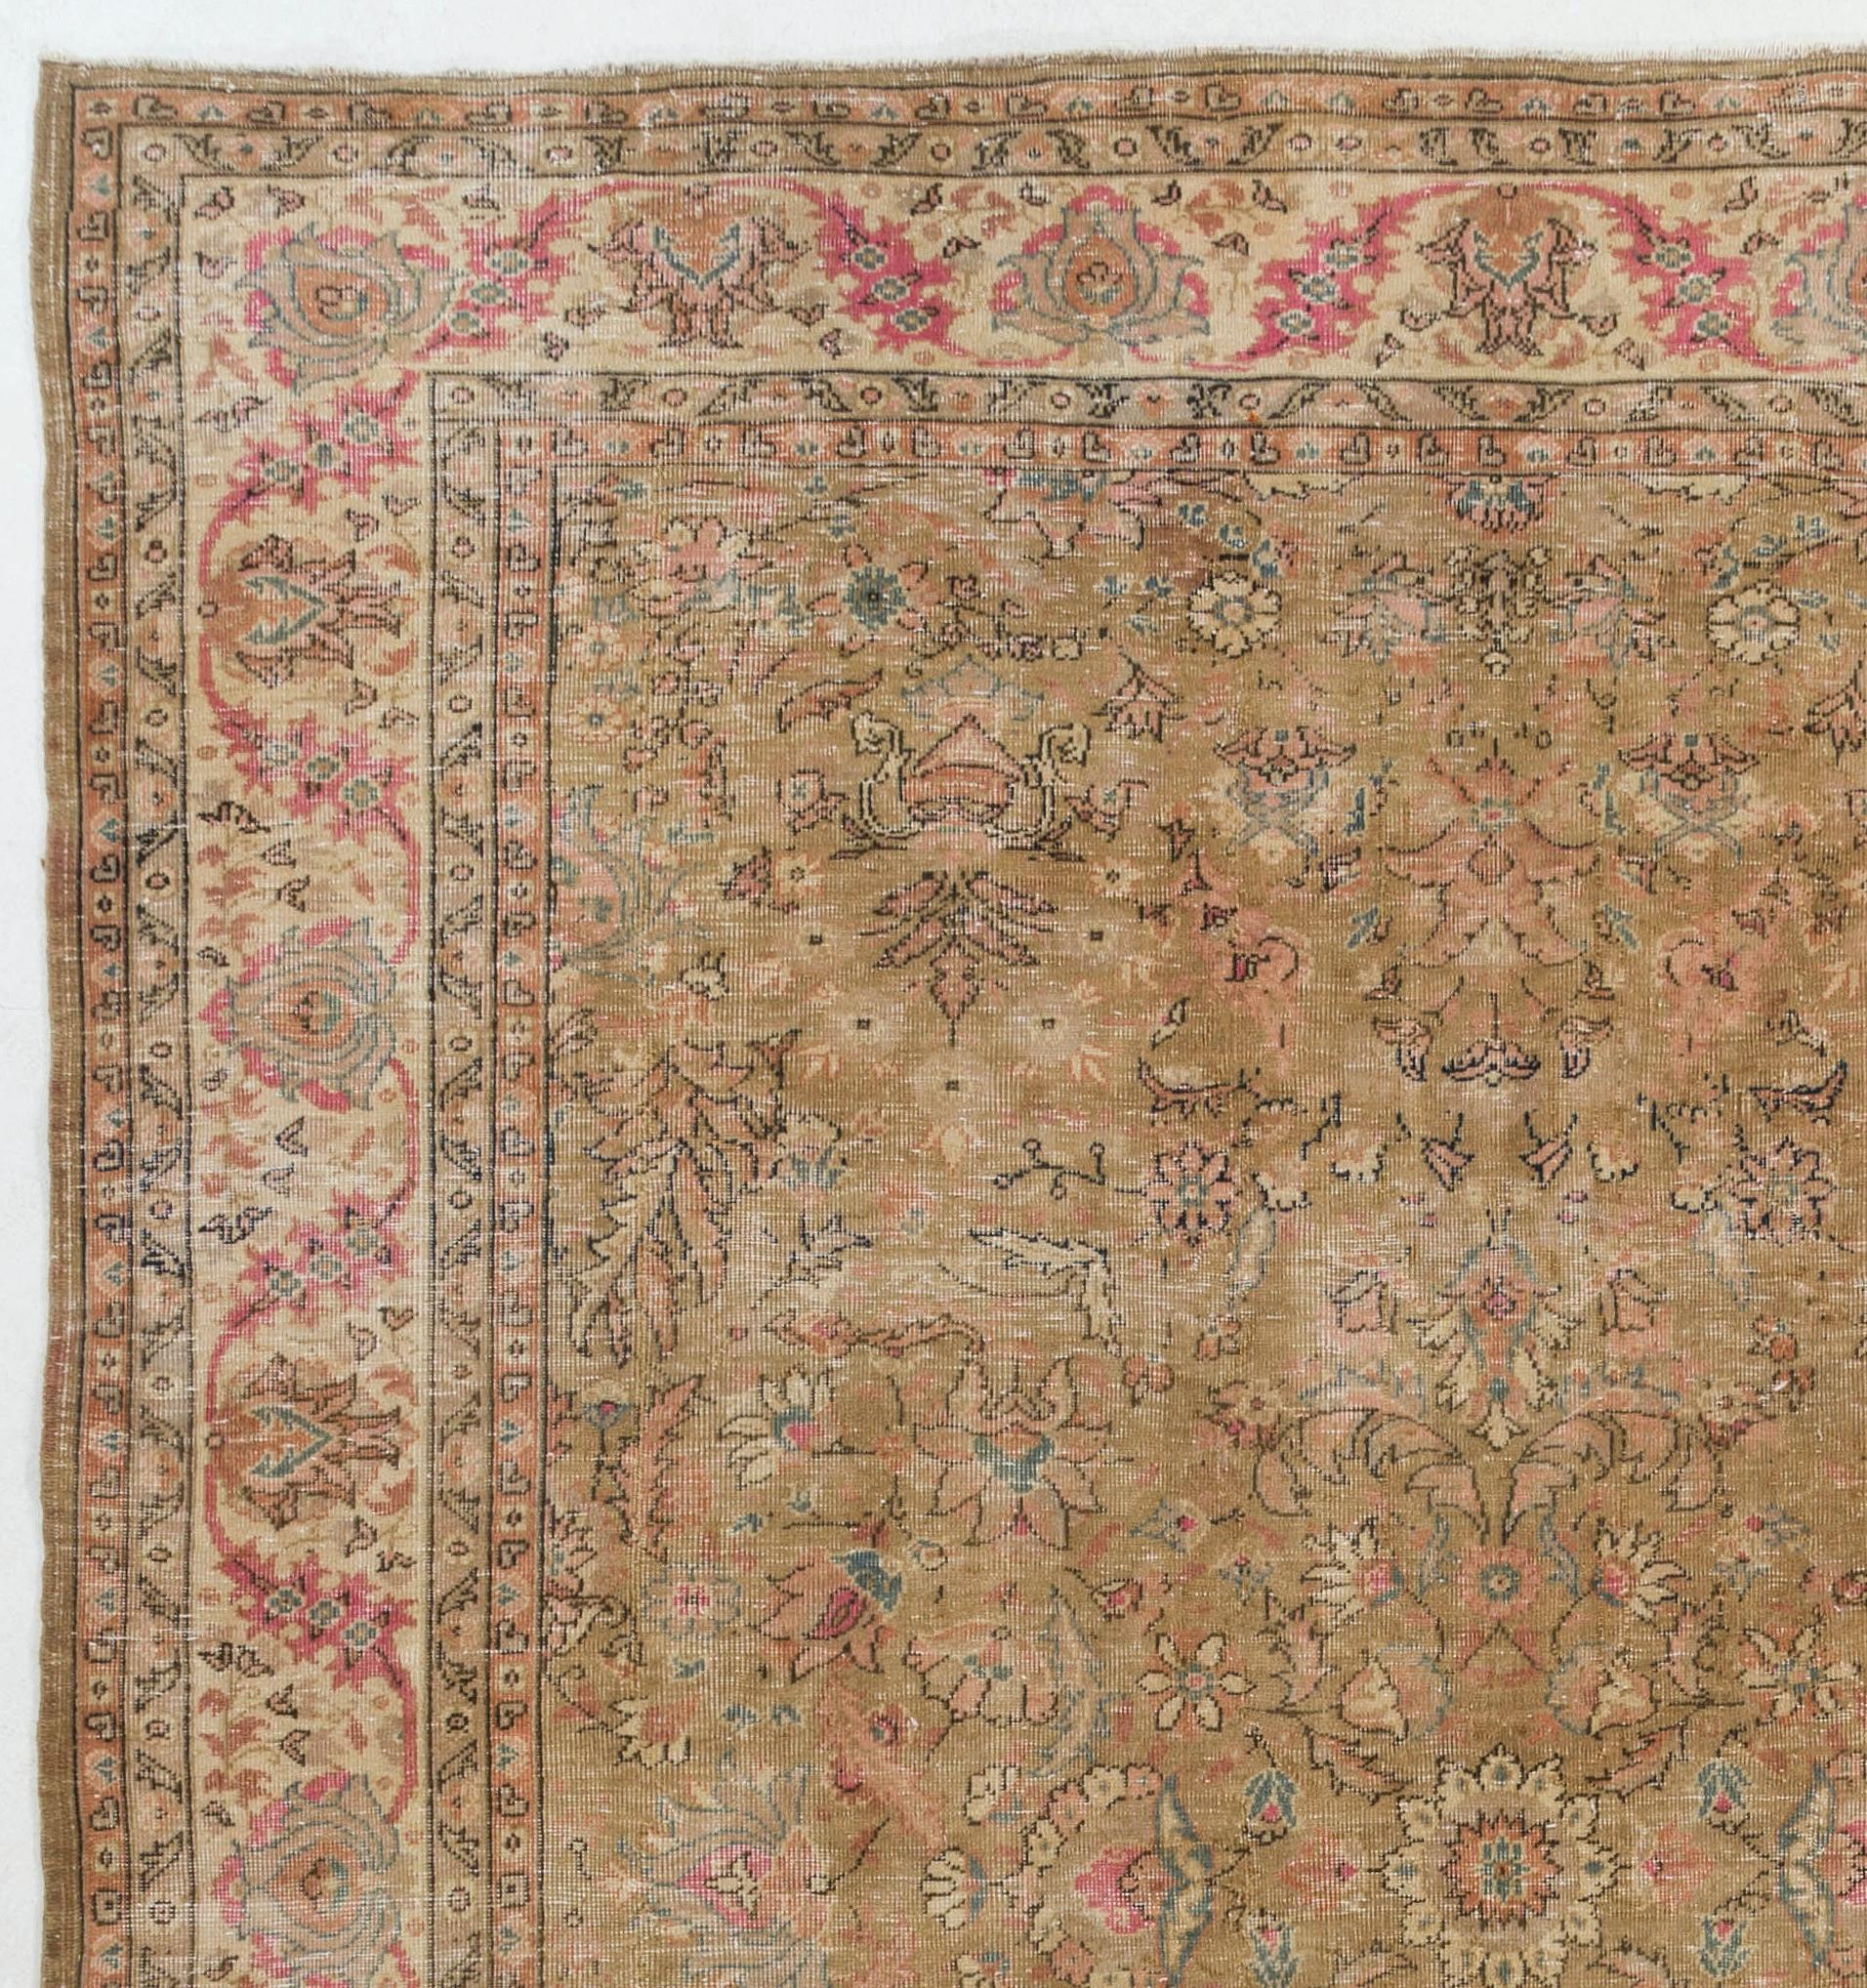 A highly decorative vintage hand-knotted Turkish Oushak rug with low wool pile on finely woven cotton foundation and a design that is extremely well defined and very detailed. The stylized outlines of gently scrolling leaves and large floral heads